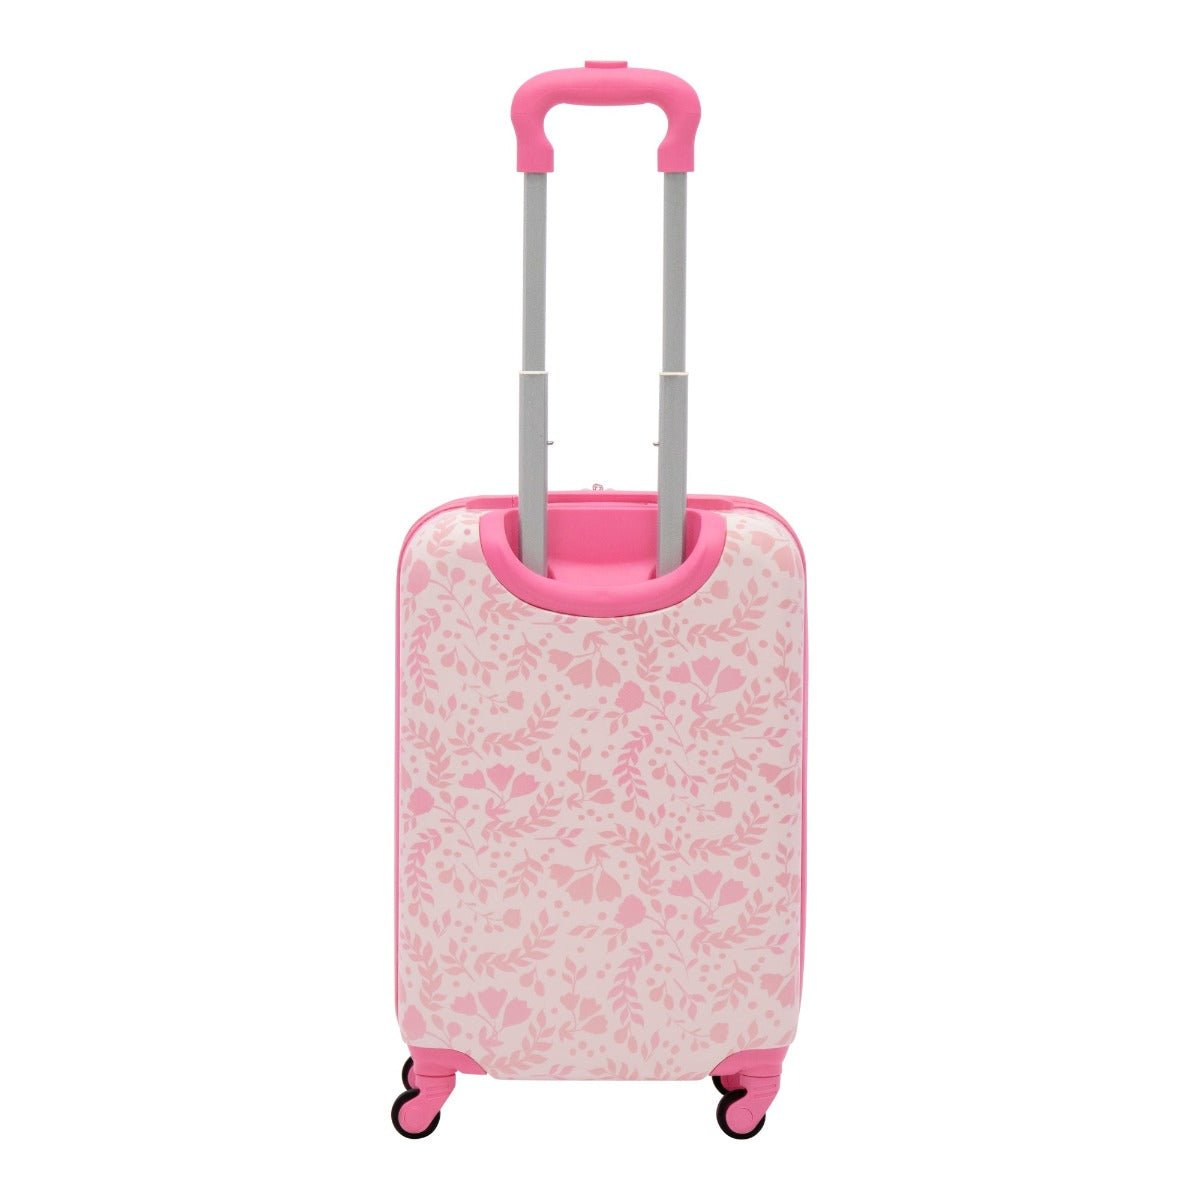 Disney Ful Minnie Mouse Floral Pink Hardside Spinner Suitcase - 20.5 inch Carry On Kids Travel Luggage